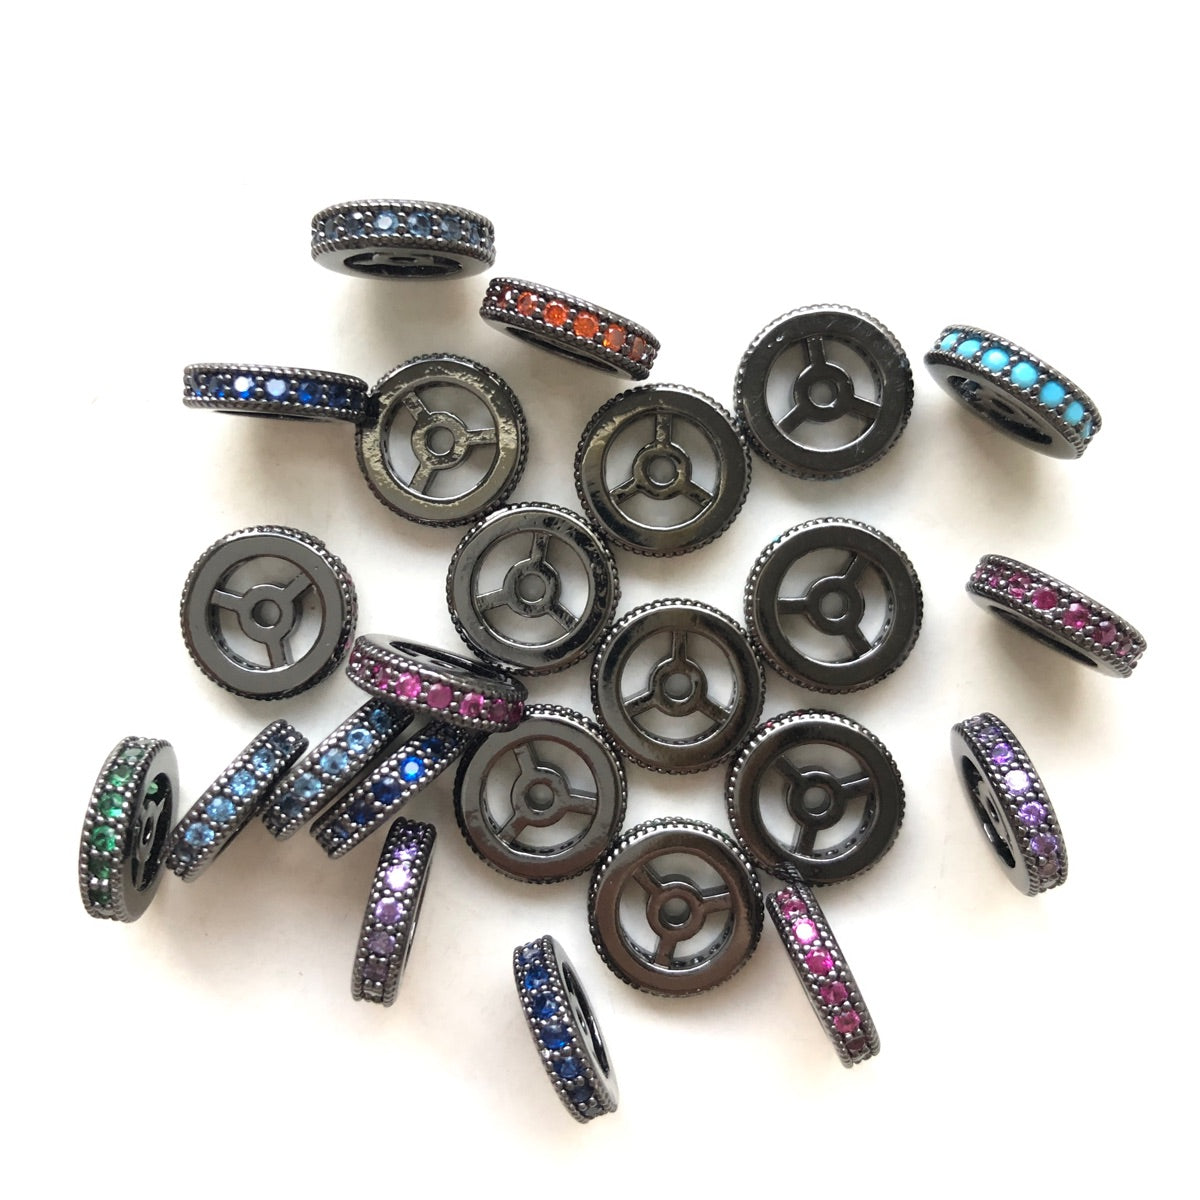 20pcs/lot 9.6/12mm Multicolor CZ Paved Wheel Rondelle Spacers Mix Black CZ Paved Spacers New Spacers Arrivals Rondelle Beads Charms Beads Beyond